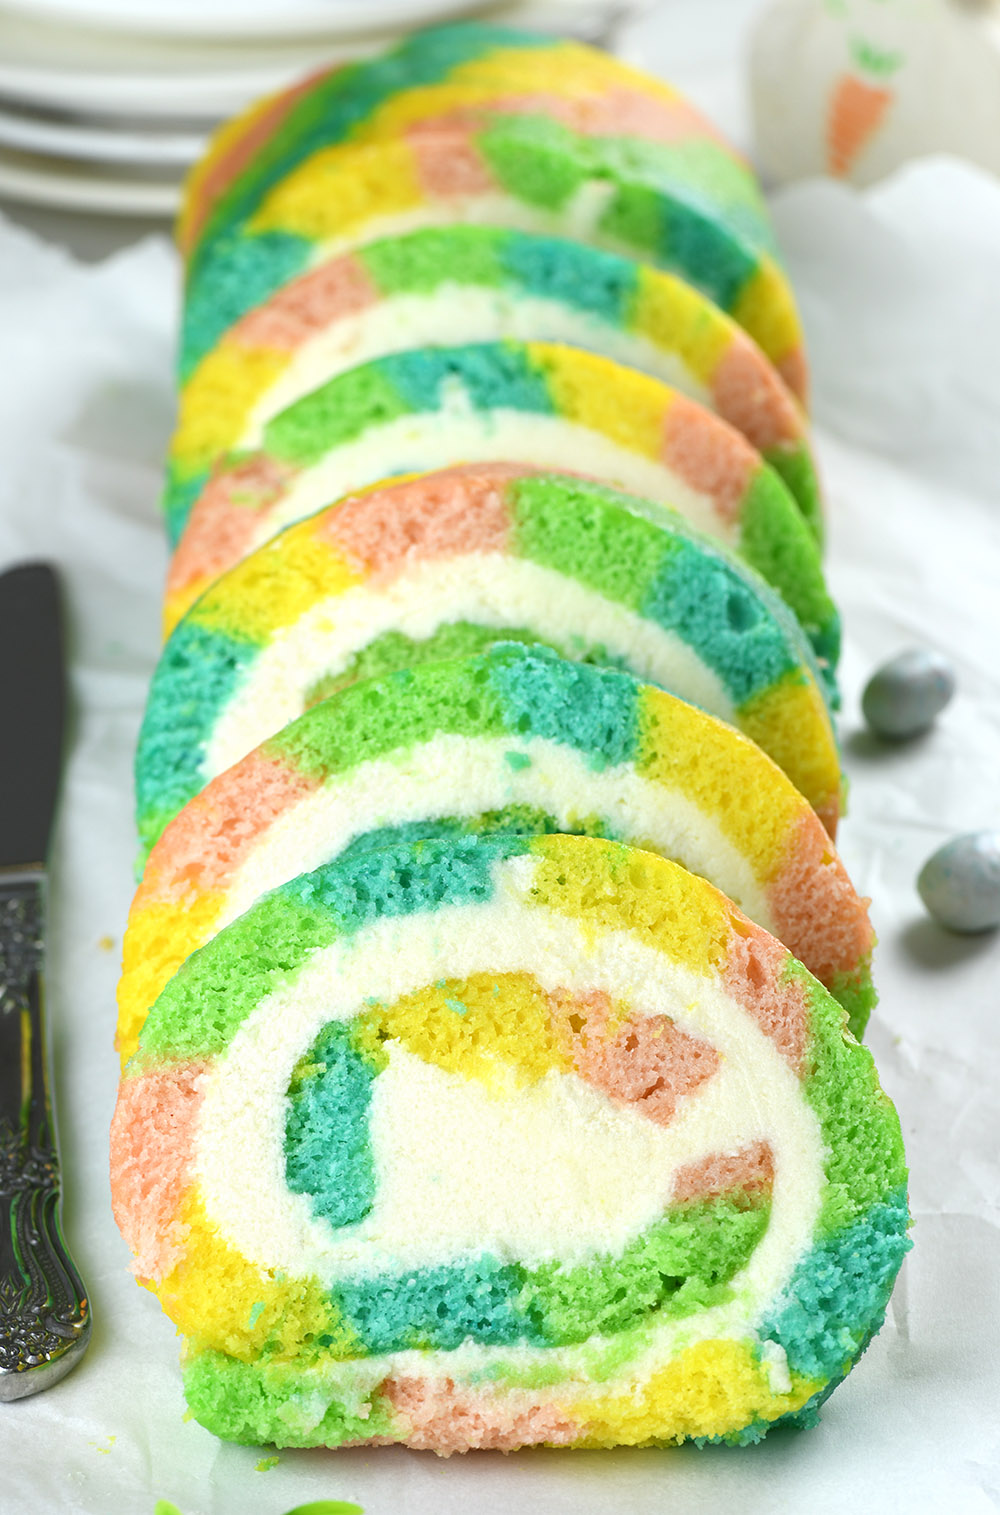 Multicolored Easter roll confection cut into several pieces